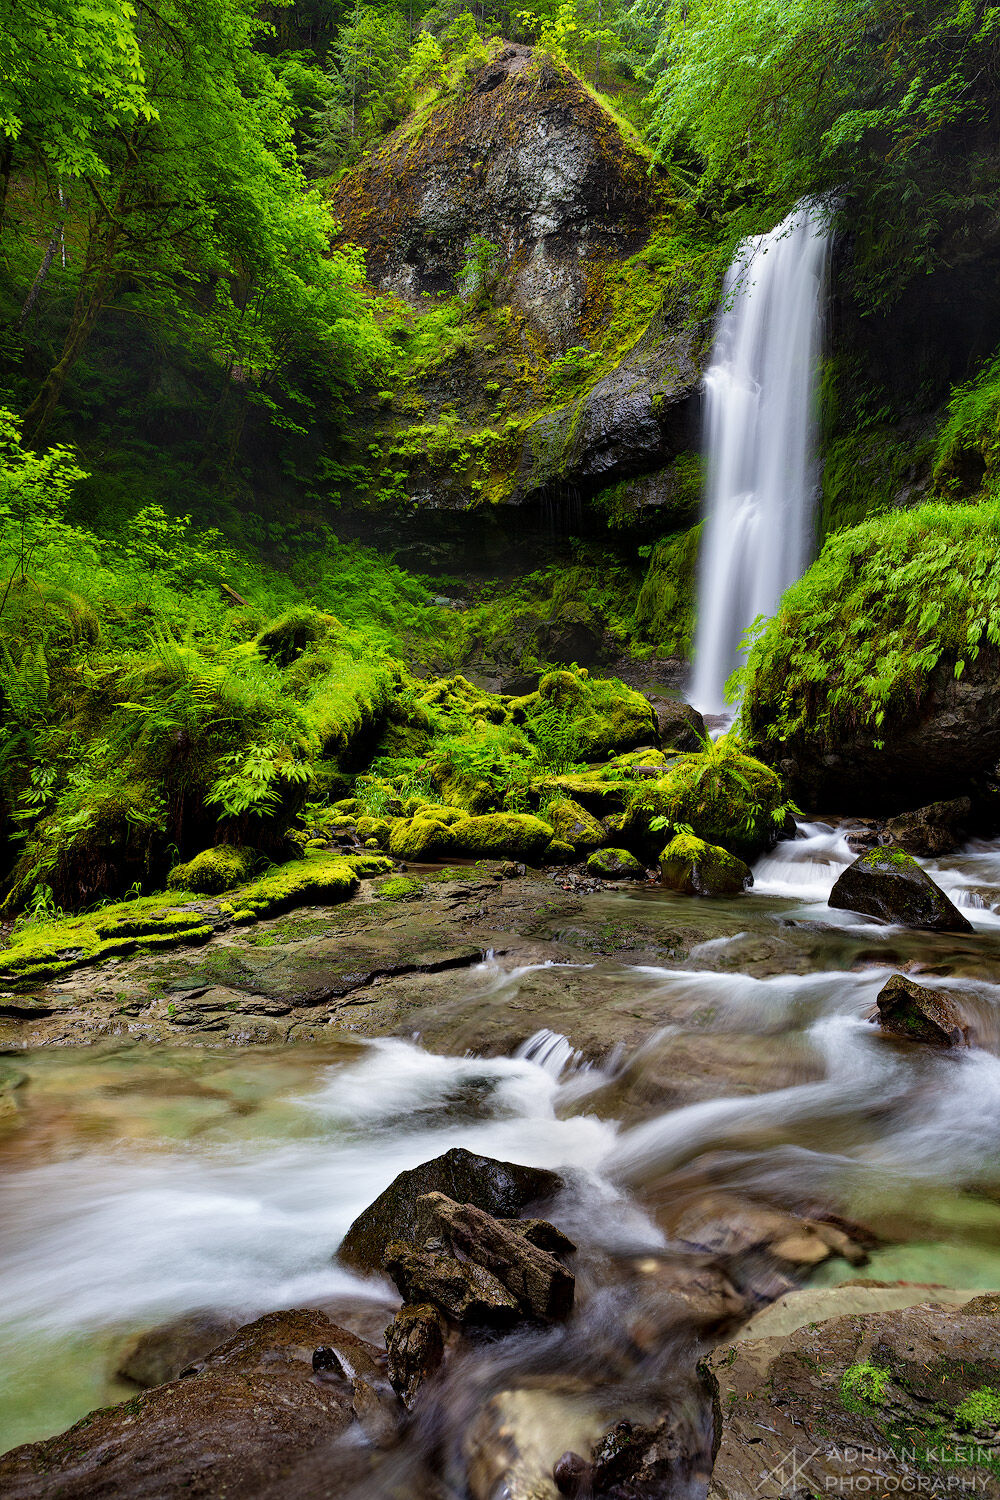 A remote waterfall in the pacific northwest seen during the vibrant spring season. Limited Edition of 100.